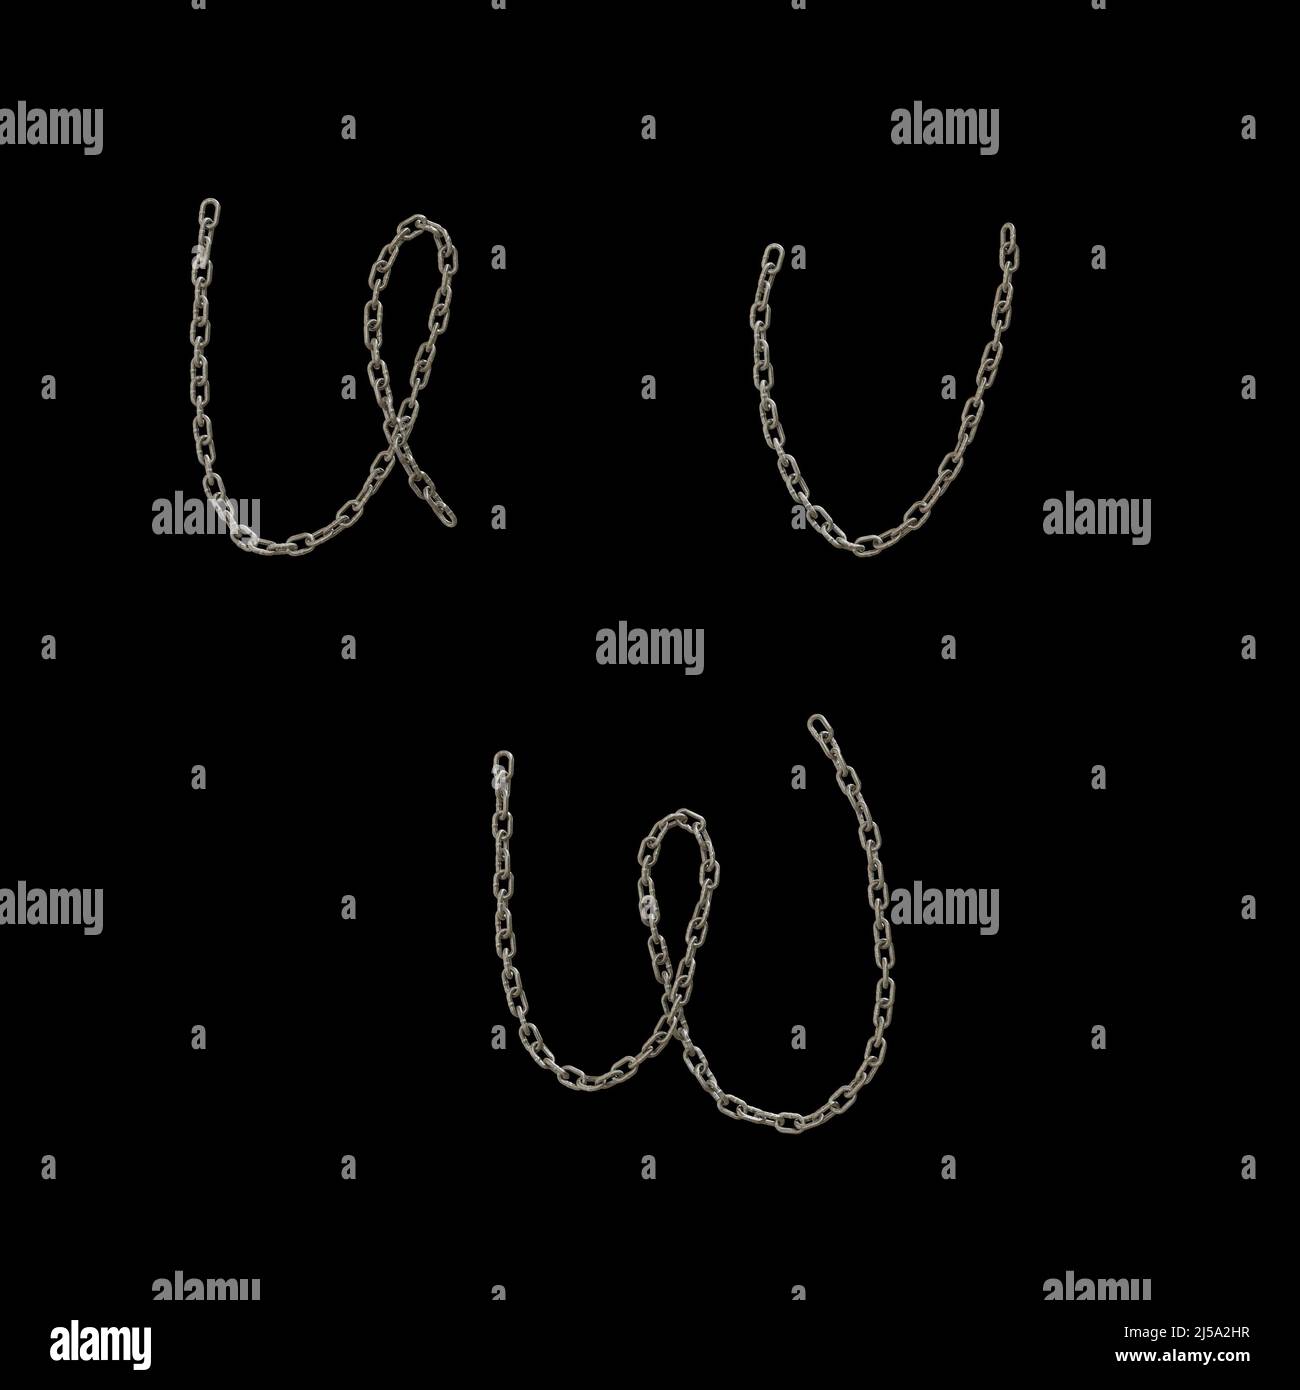 3d rendering of metal chain capital letter alphabet - letters U-W Stock Photo